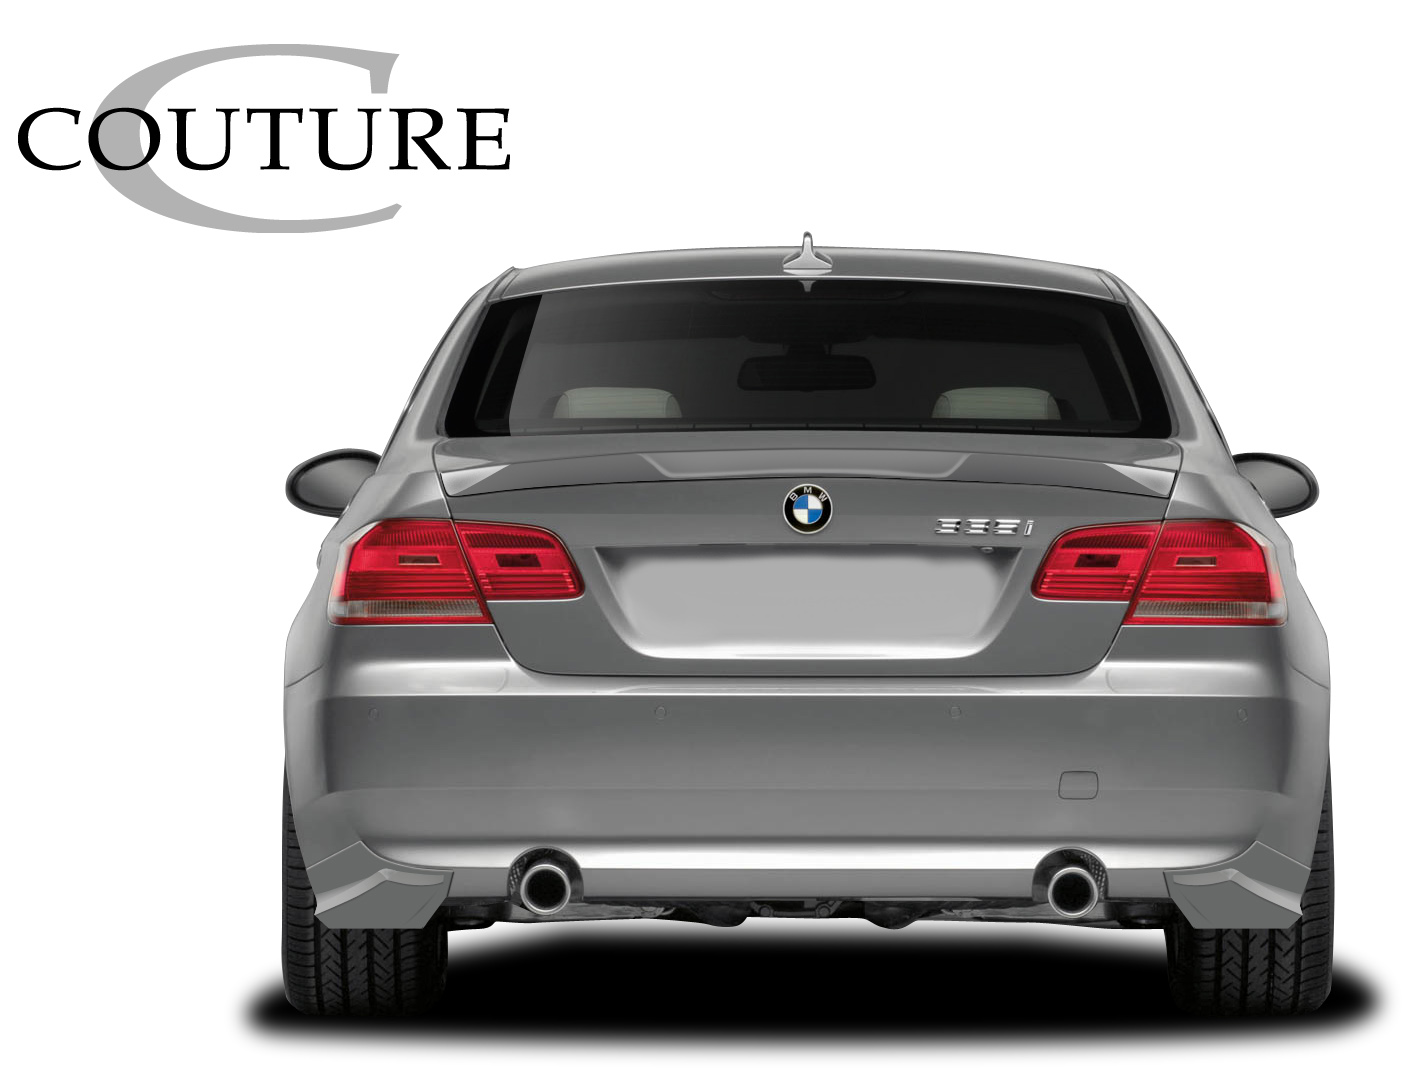 Polyurethane Wing Spoiler Bodykit for 2012 BMW 3 Series 2DR - 2007-2013 BMW 3 Series M3 E92 2DR Couture Vortex Wing Trunk Lid Spoiler - 1 Piece